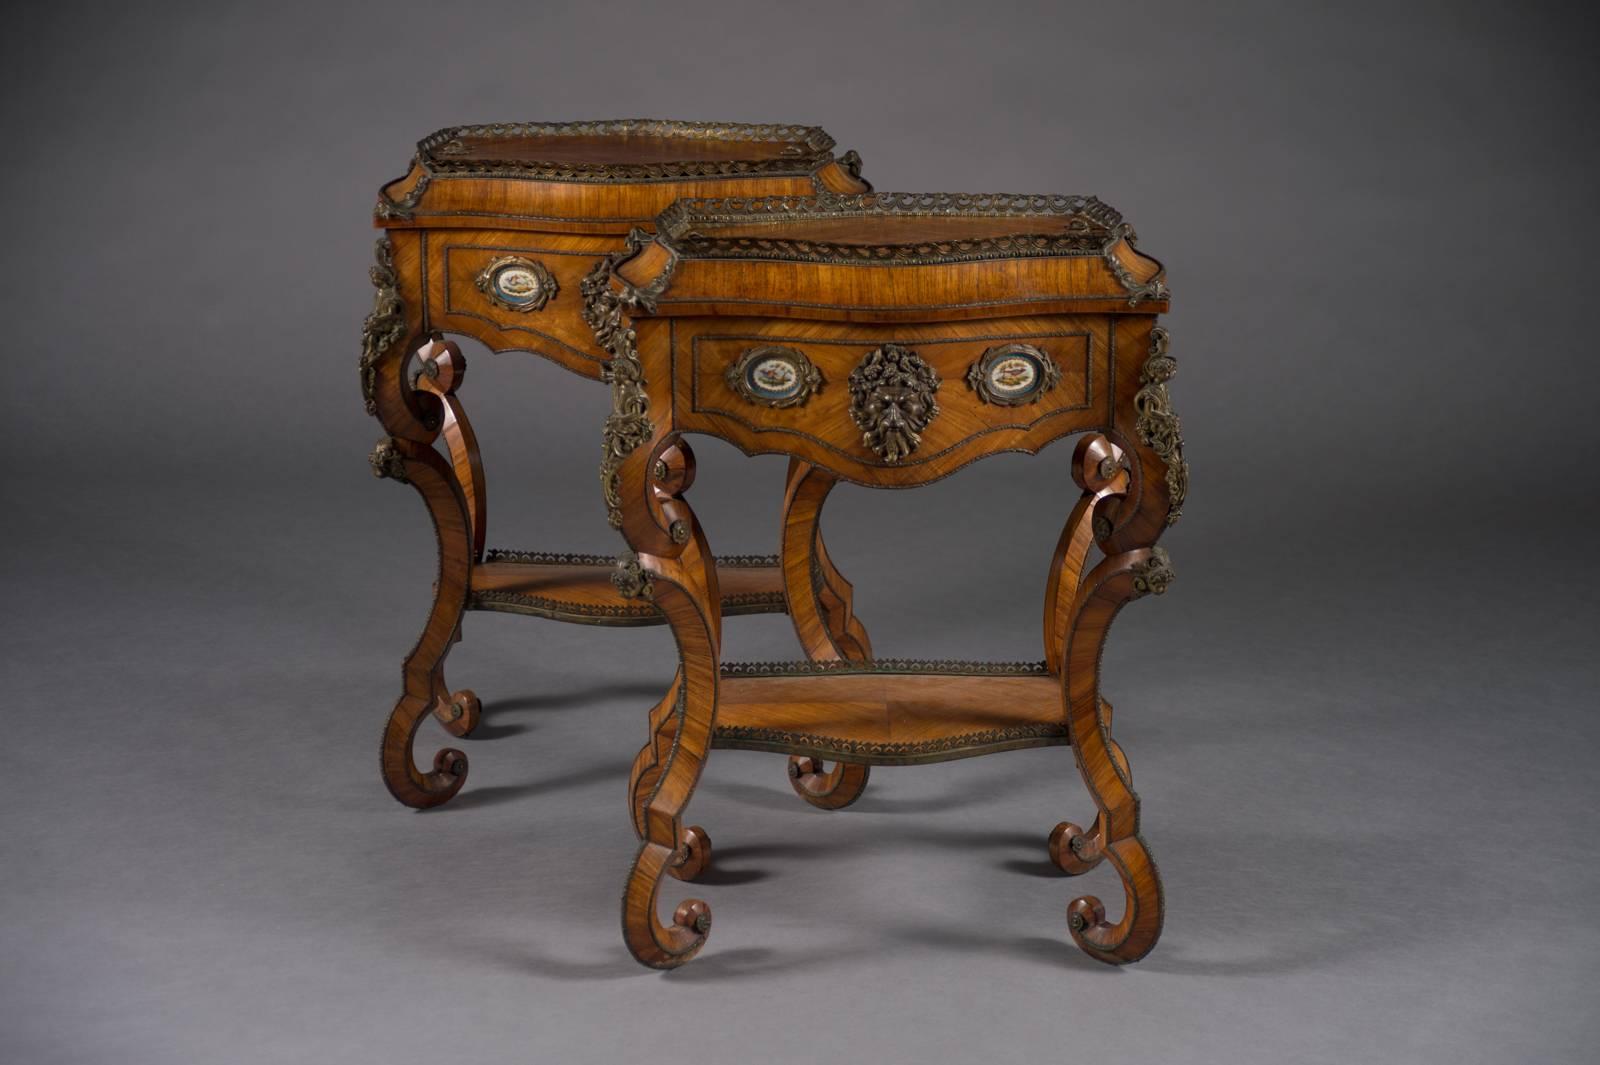 A fine pair of French Rococo style bonze and porcelain mounted side tables/planters.

The tables have lids which can be taken off and be used as planters.
They are both bronze-mounted with a mythological mask alongside a pair of porcelain